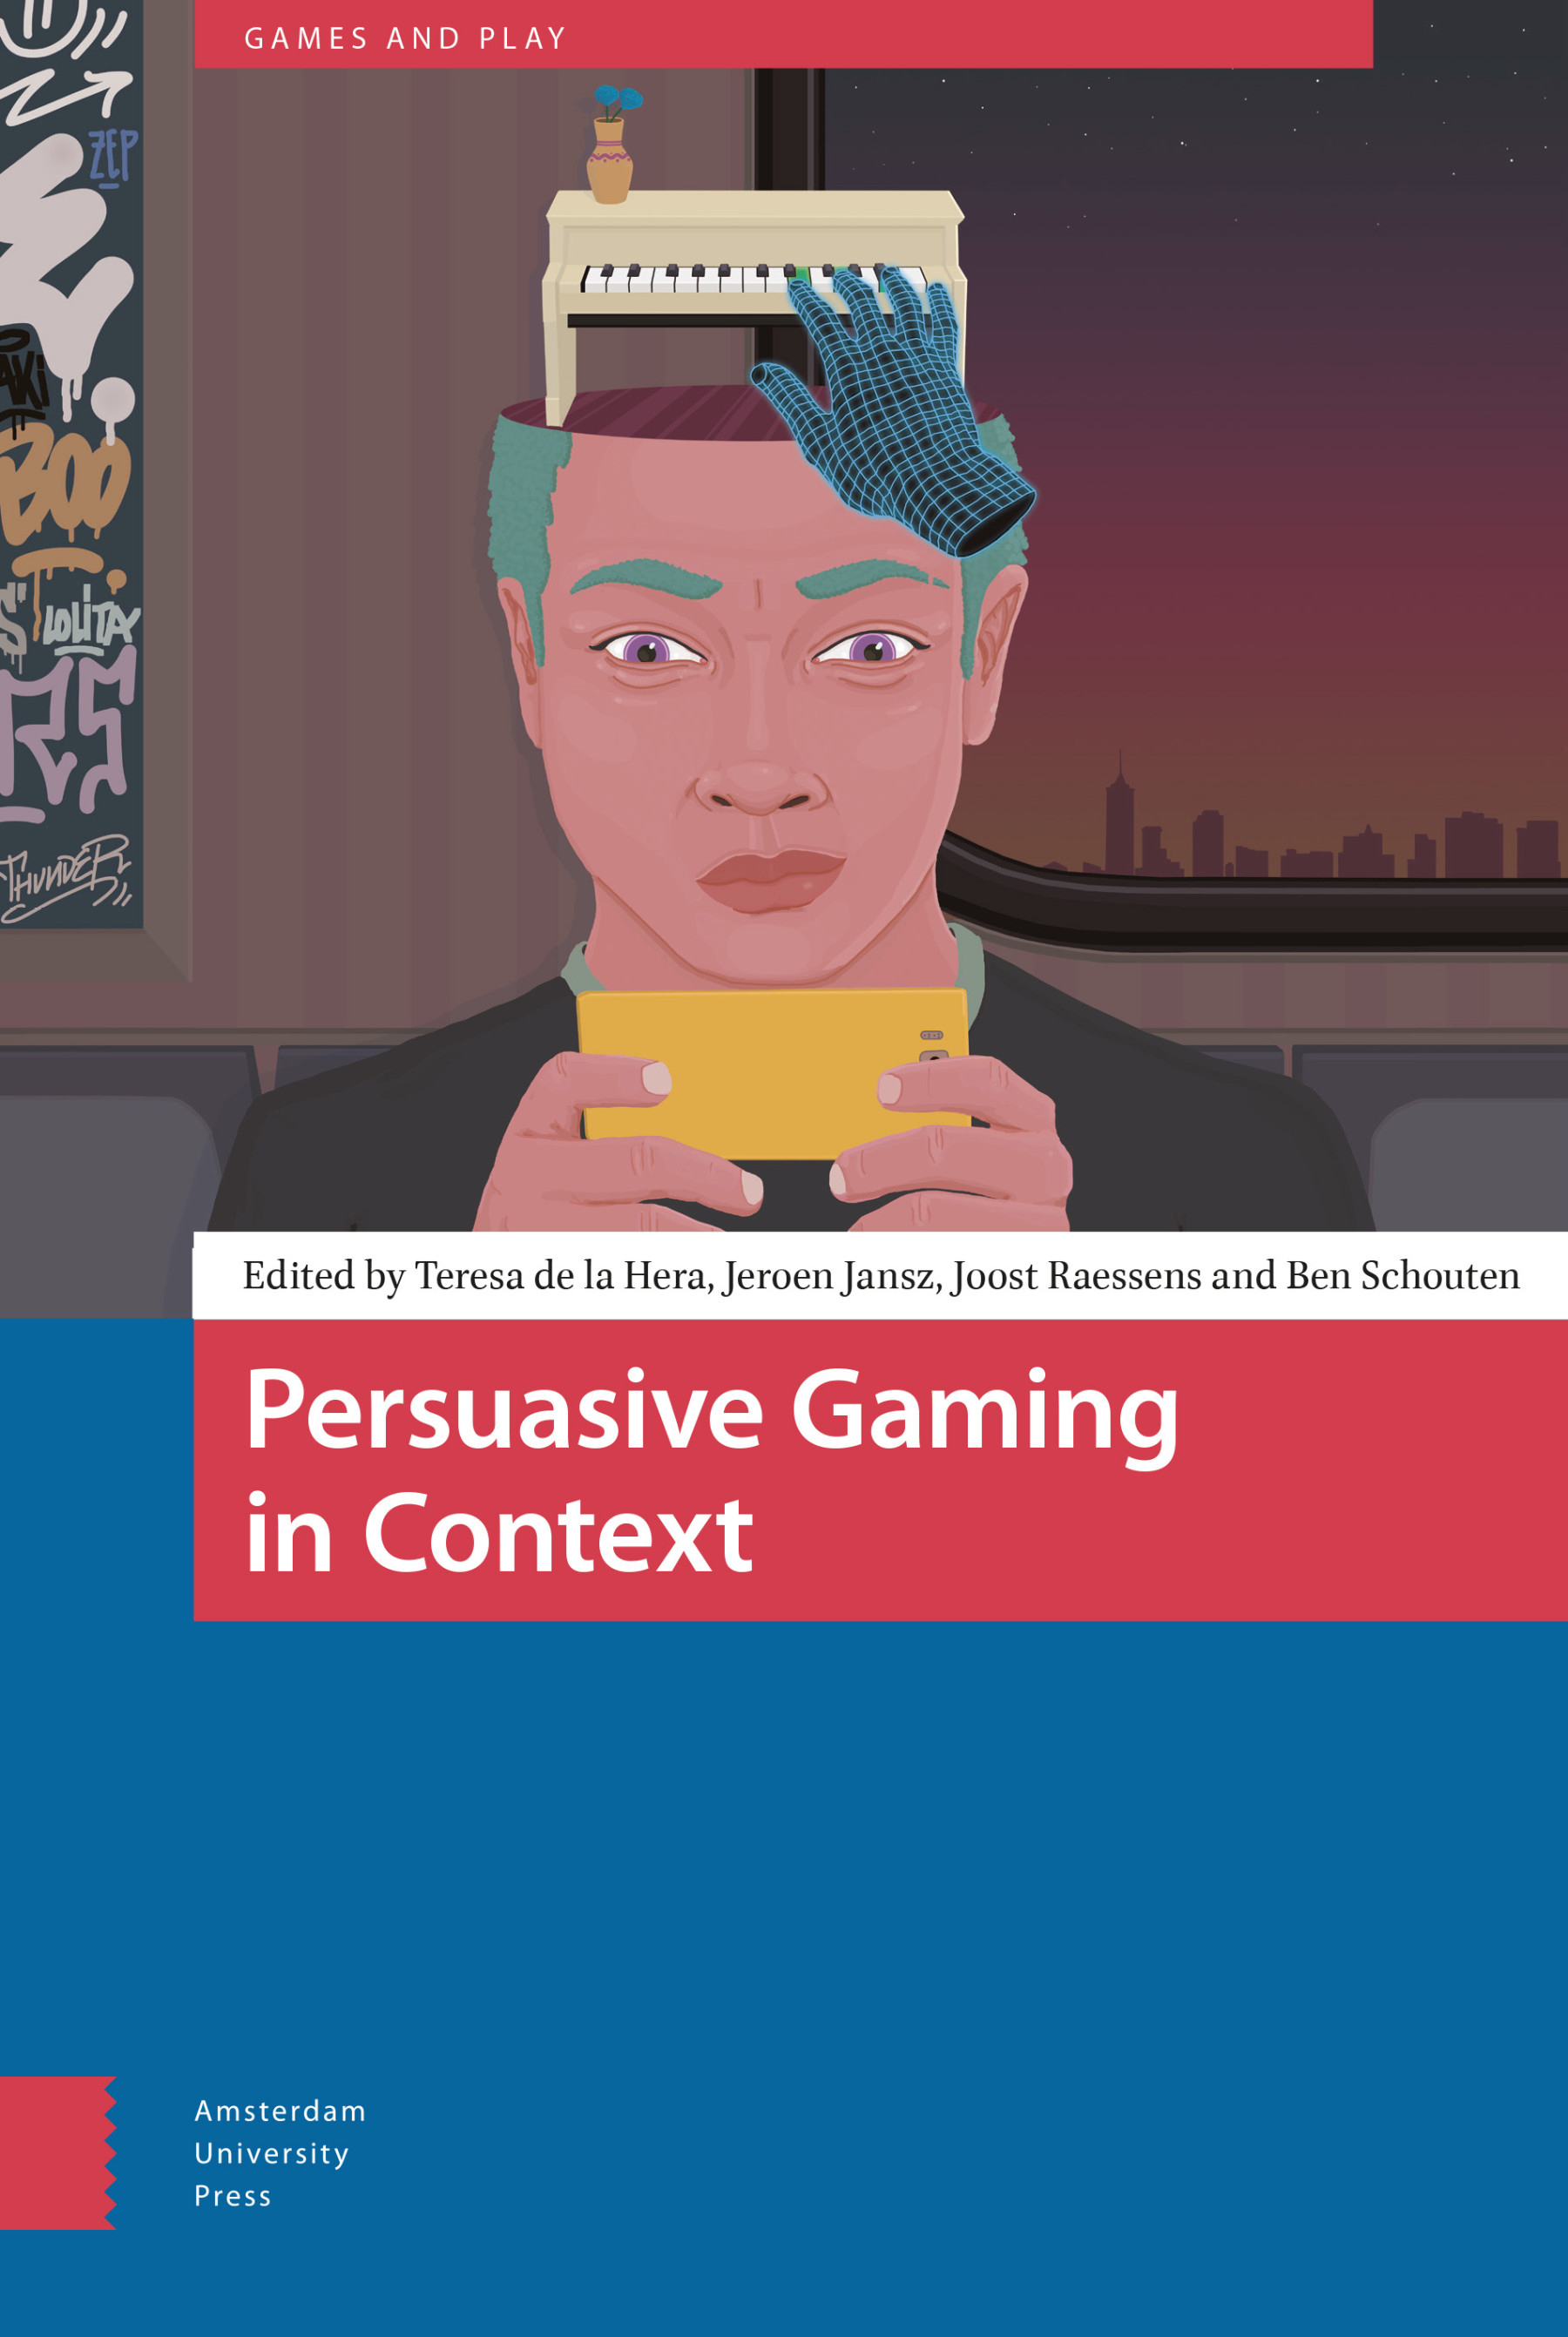 Book Cover, Persuasive Gaming in Context